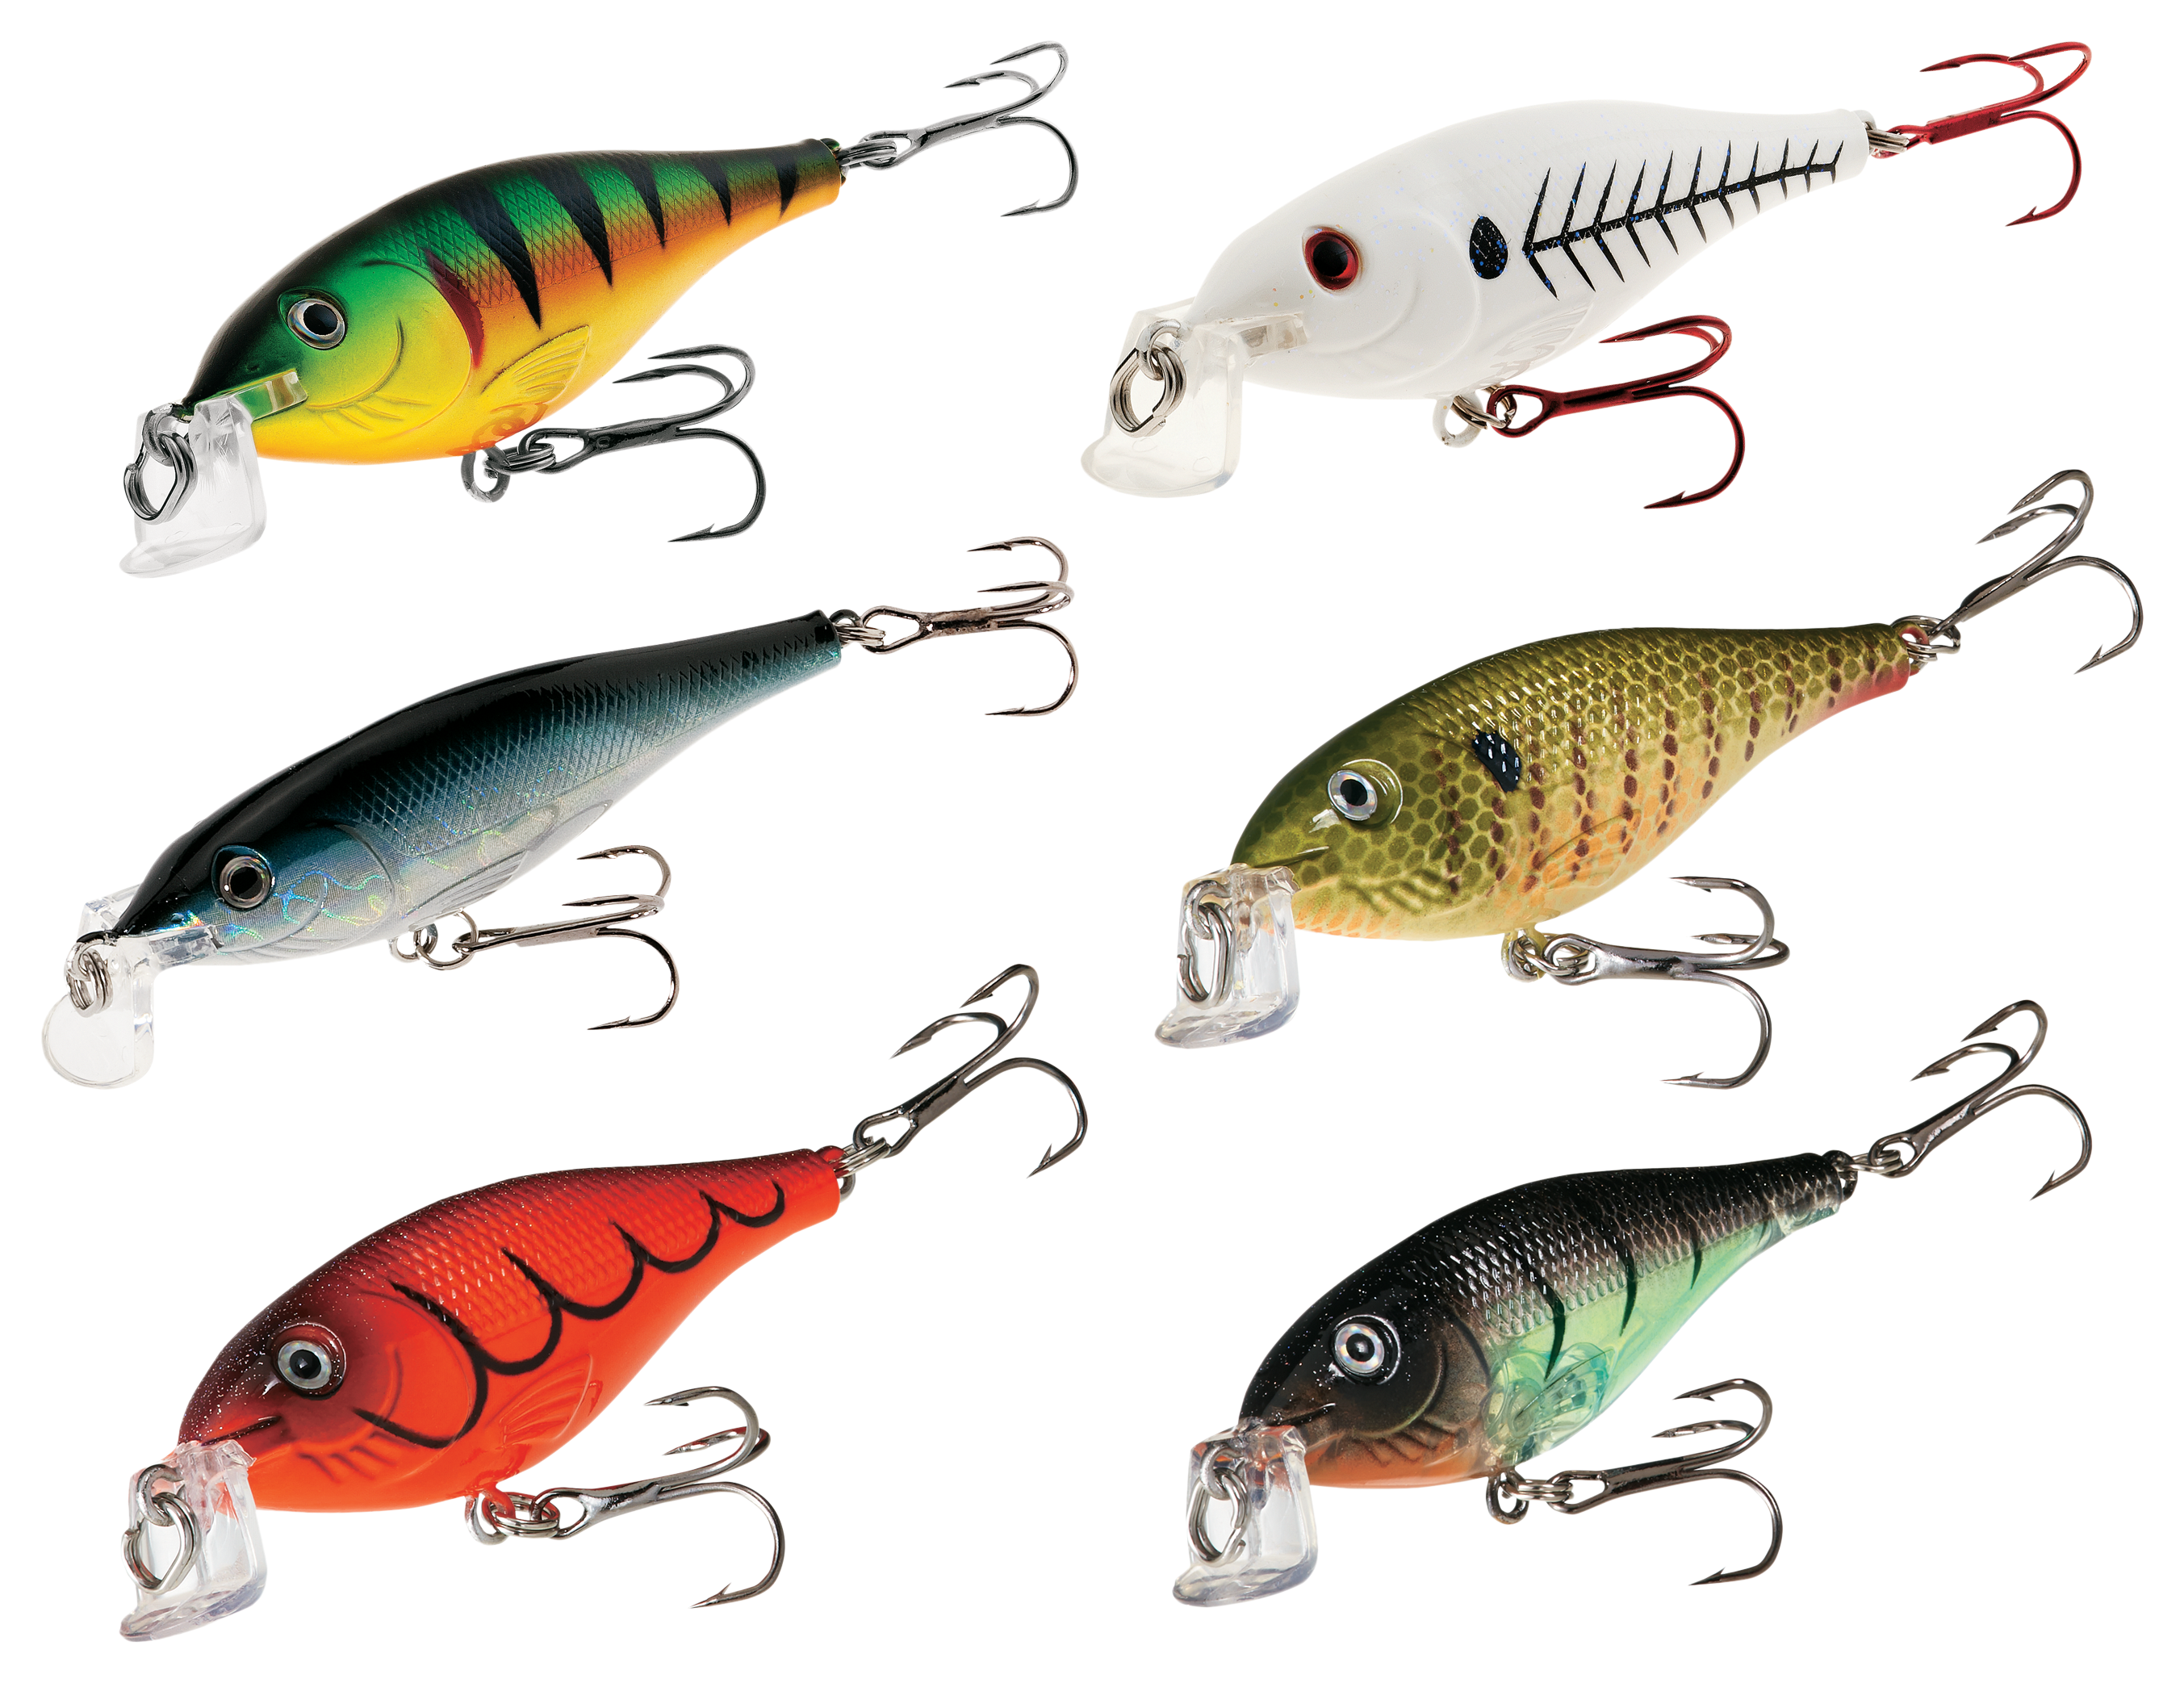 LOT OF 5 Bass Pro Shops XPS lures - 3x Super Shallow Cranks and 2x